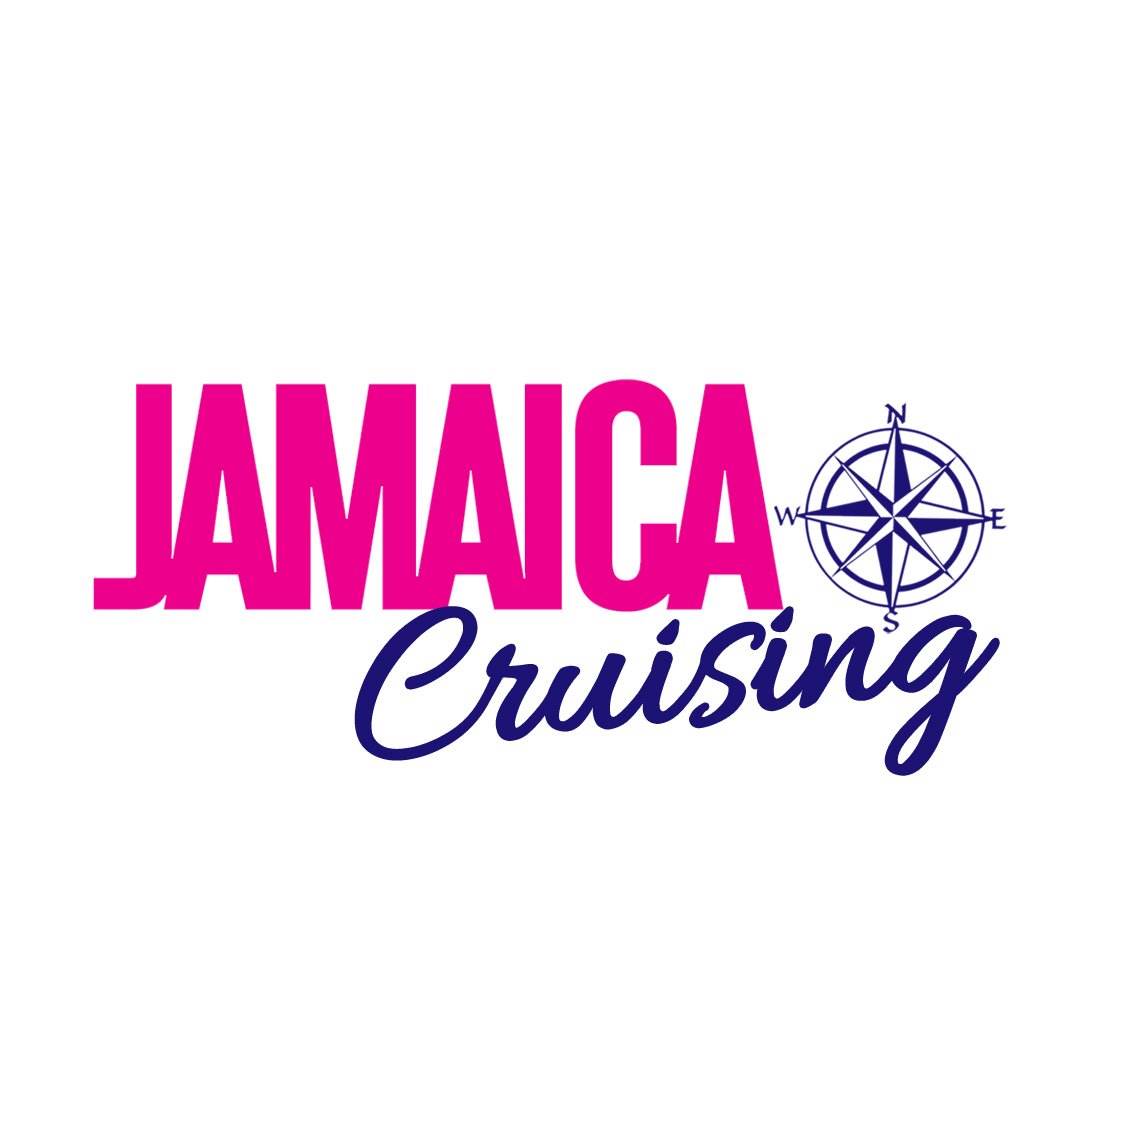 Jamaica Cruising is an agency of the Ministry of Tourism.